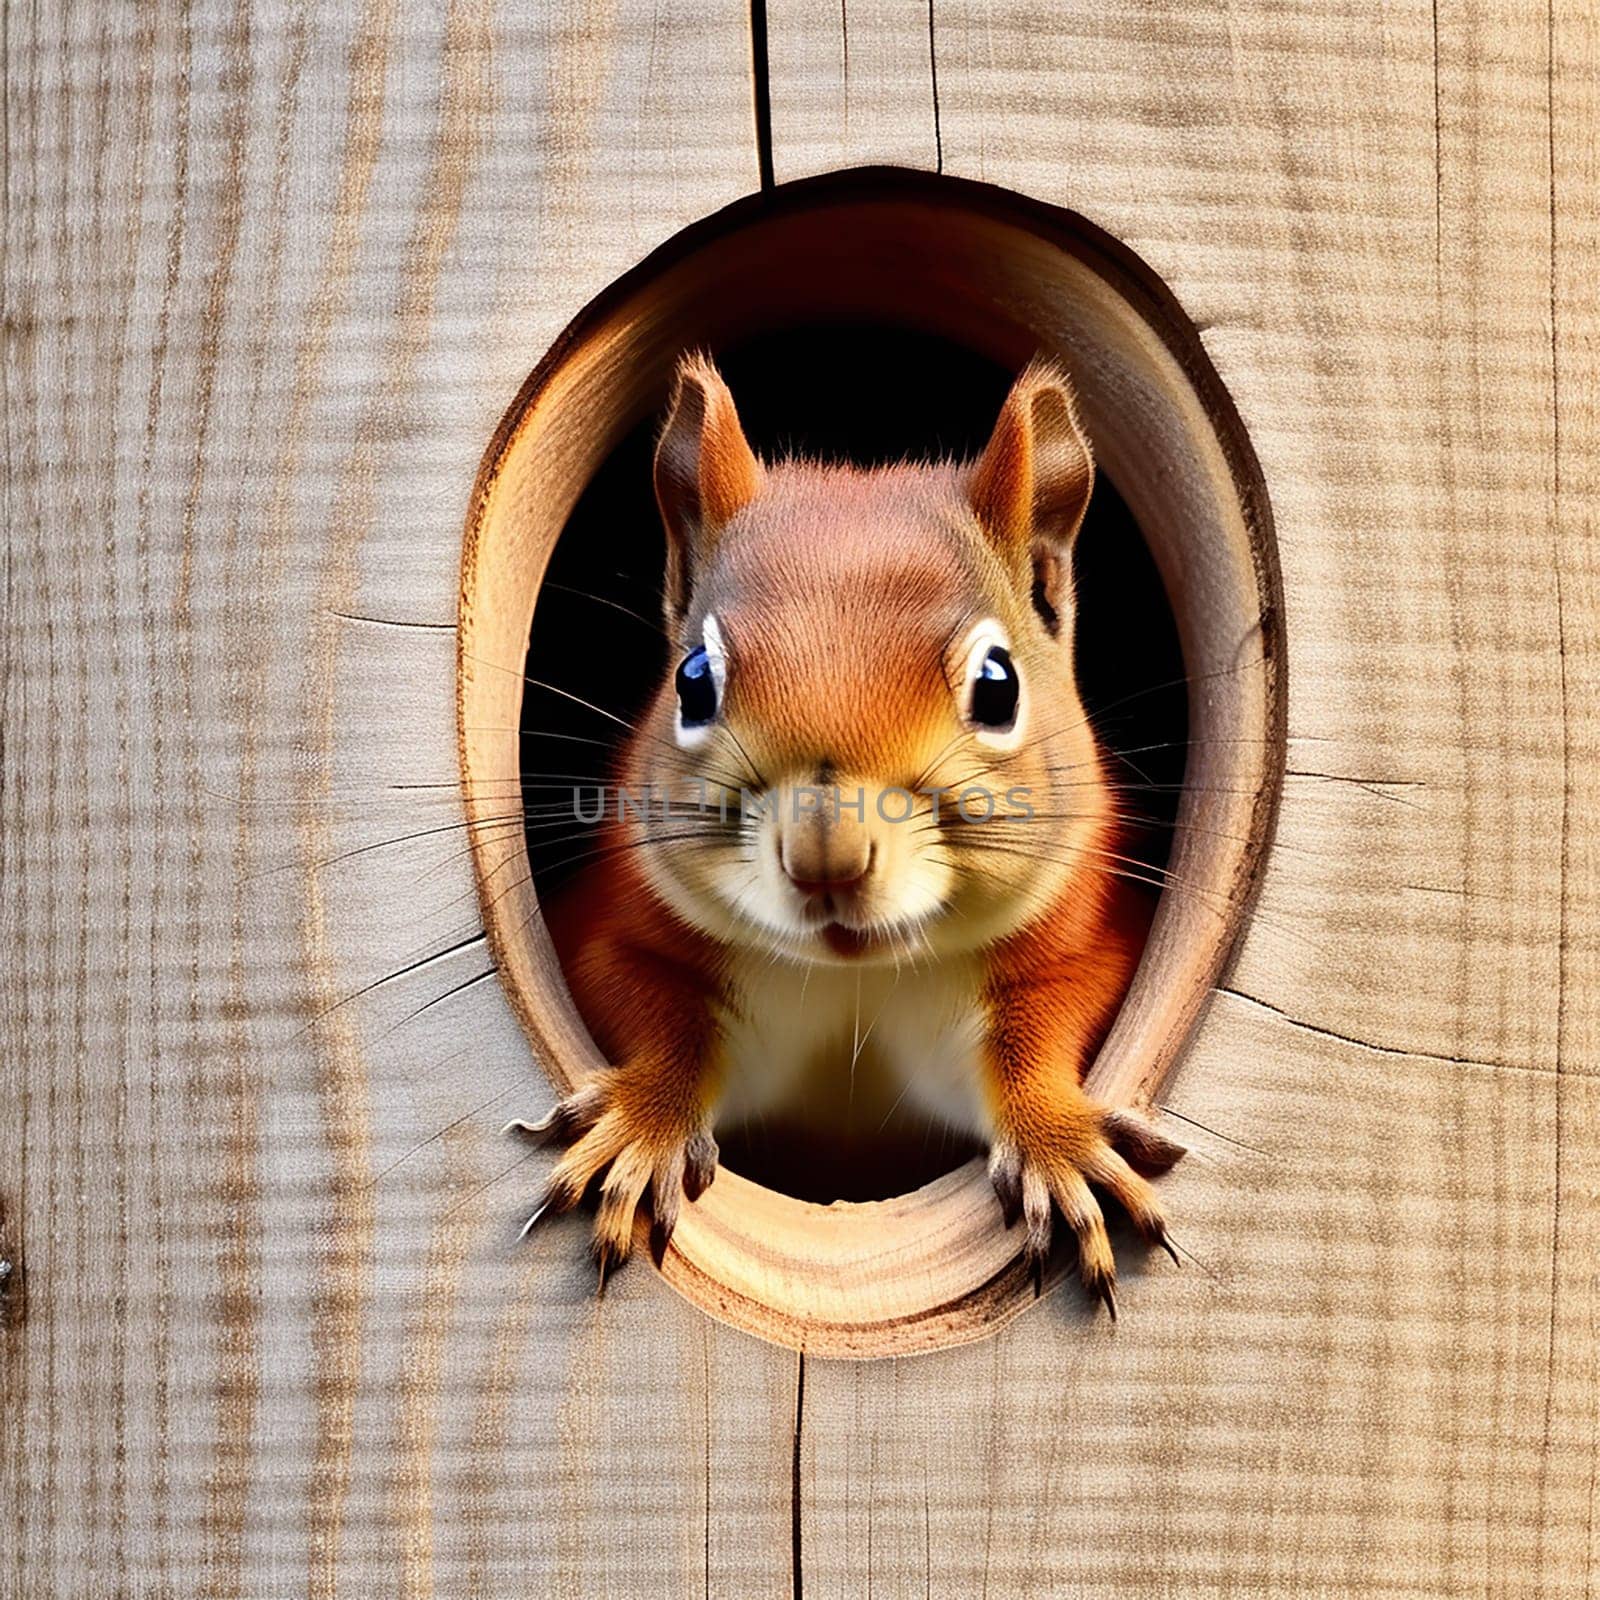 Baby Red Squirrel Peeking Out of Wood Hole by Petrichor